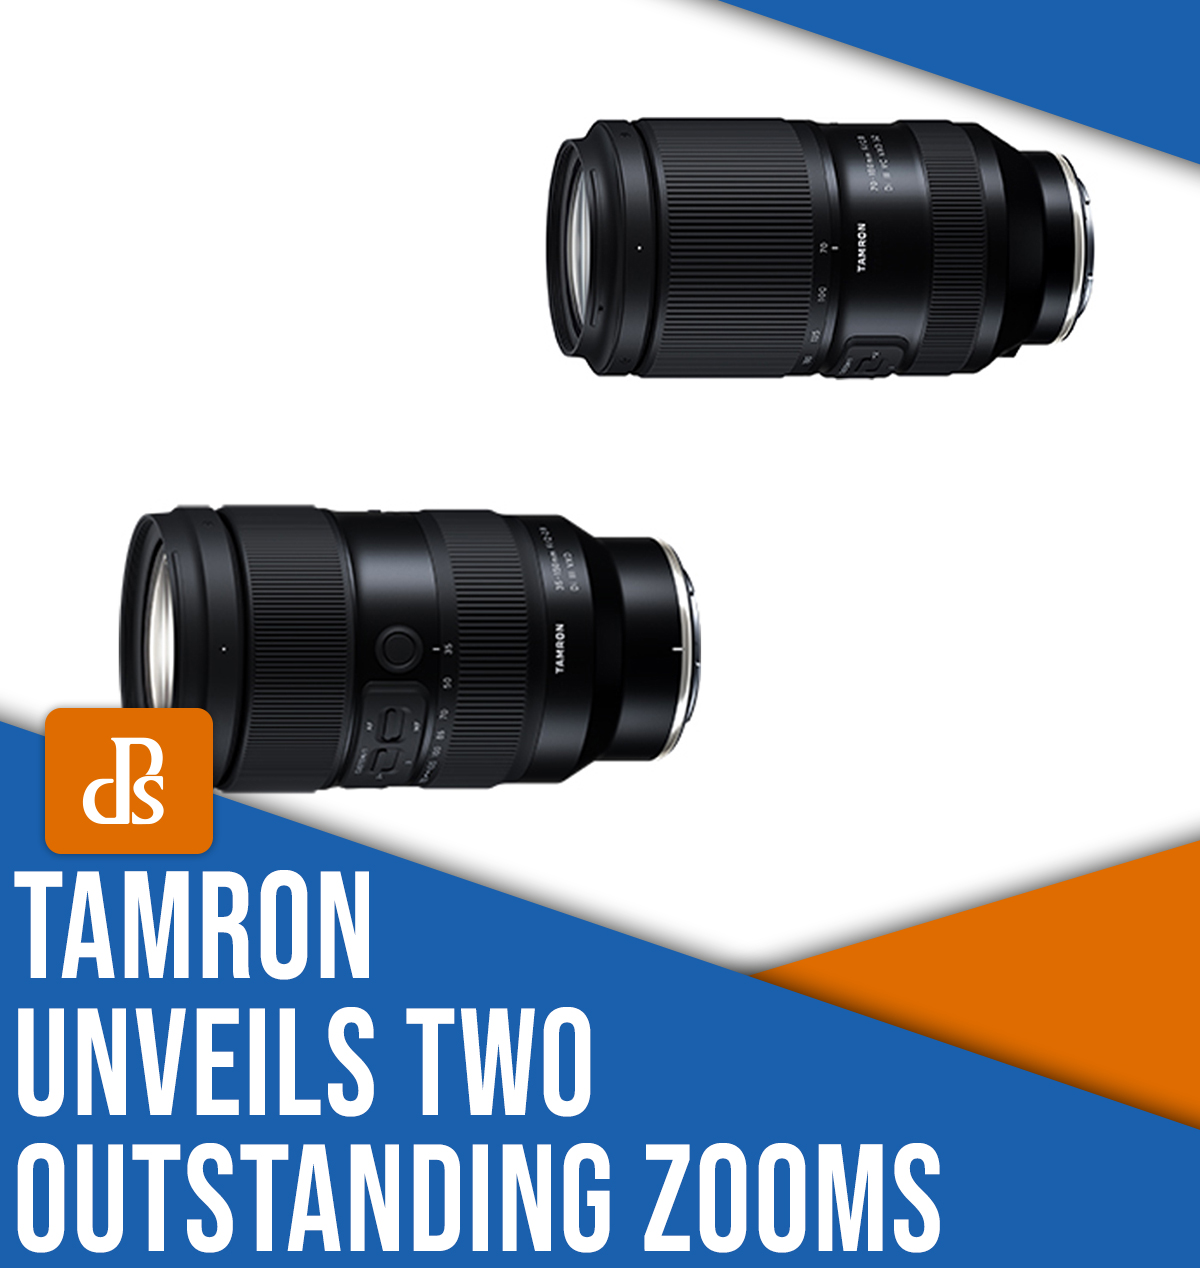 Tamron unveils two outstanding zooms